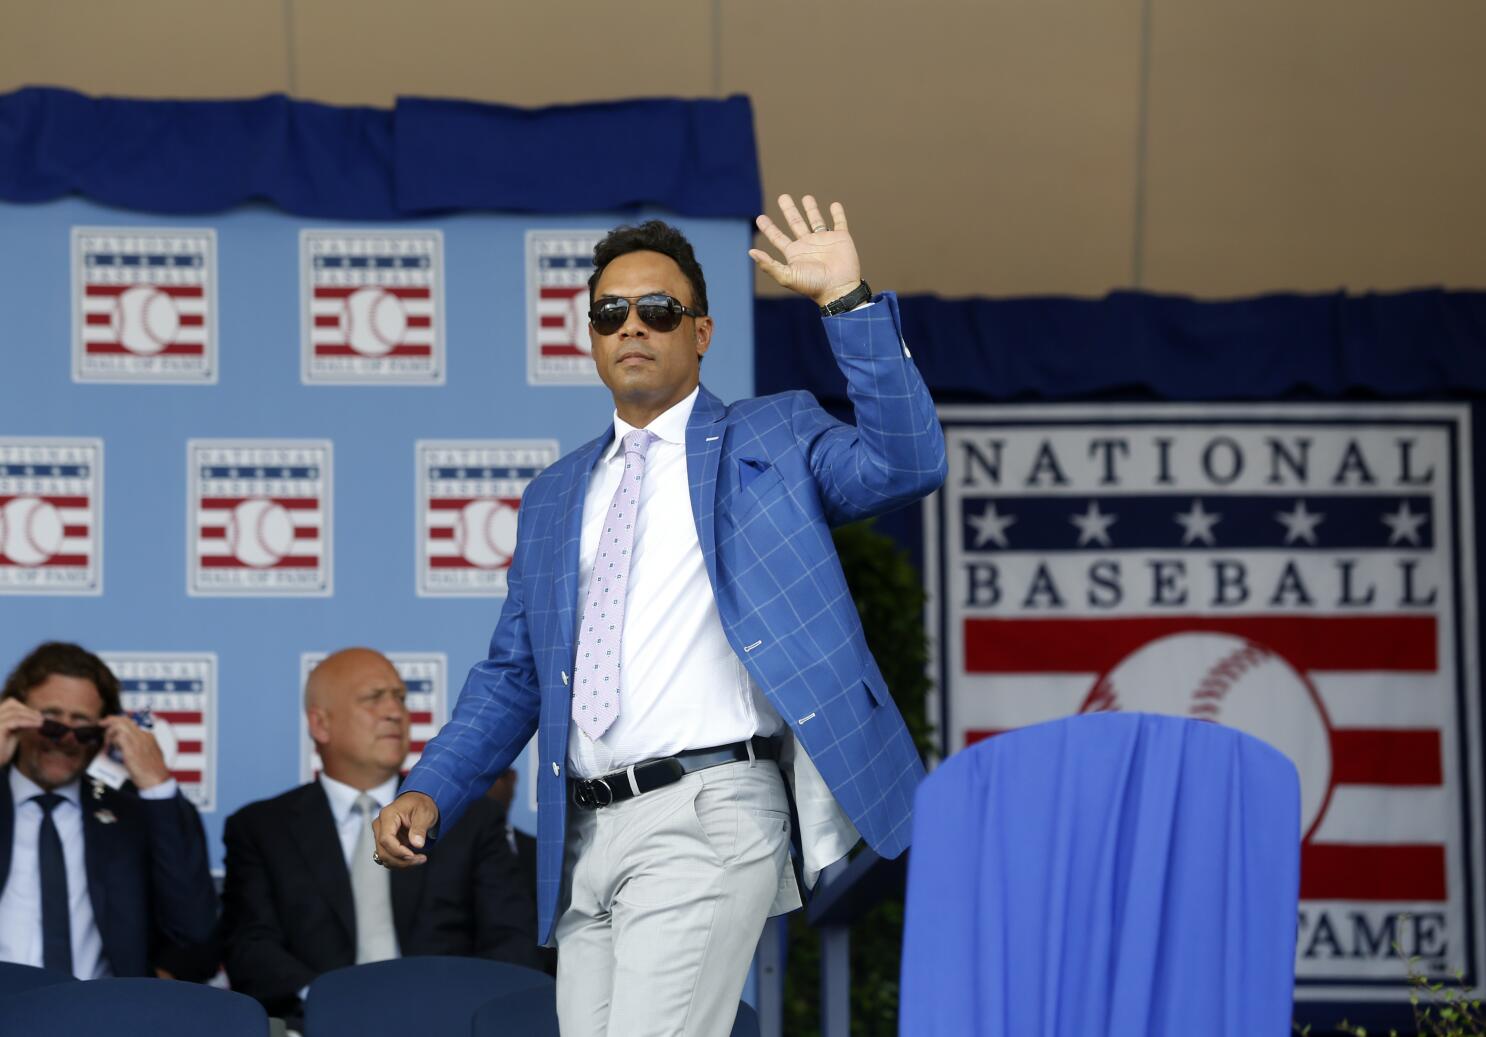 Rewriting baseball history isn't the answer, no matter what Roberto Alomar  might have done